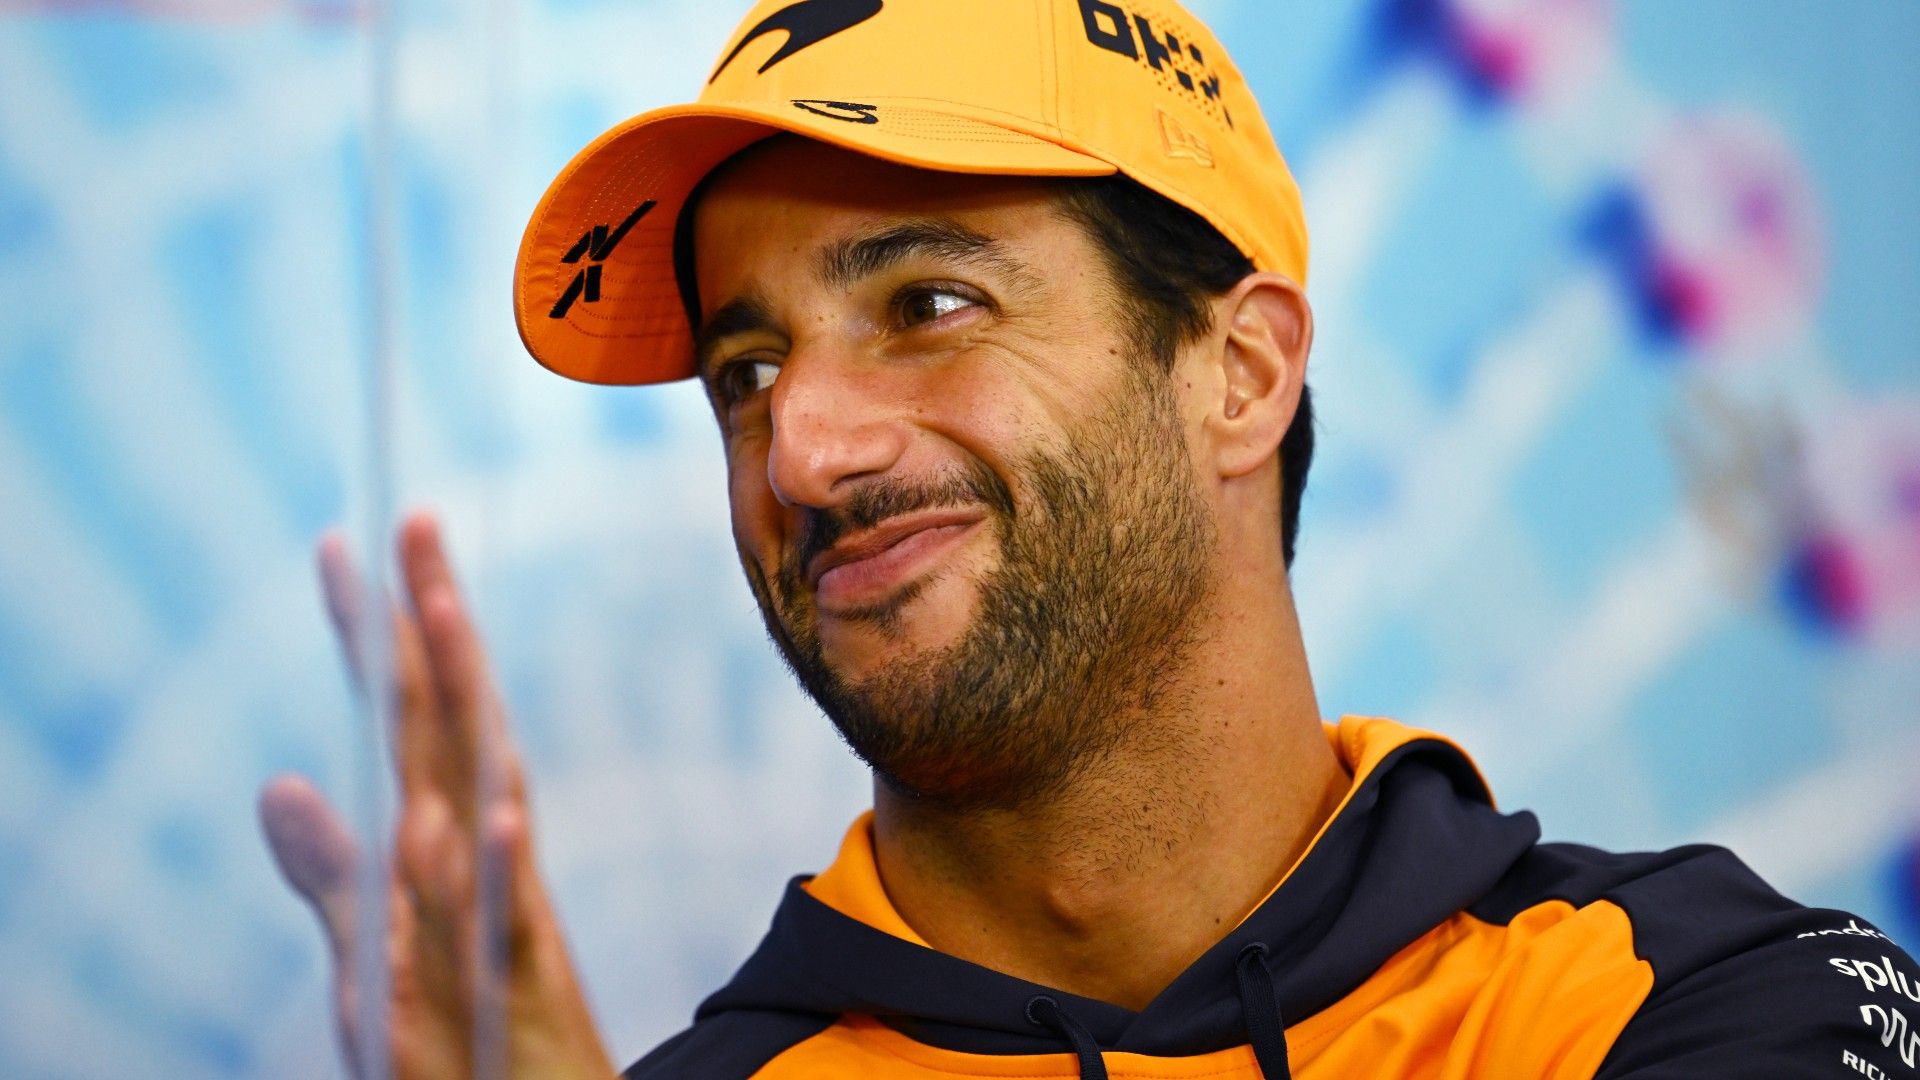 Daniel Ricciardo explains why Red Bull role is 'best thing' for him next year